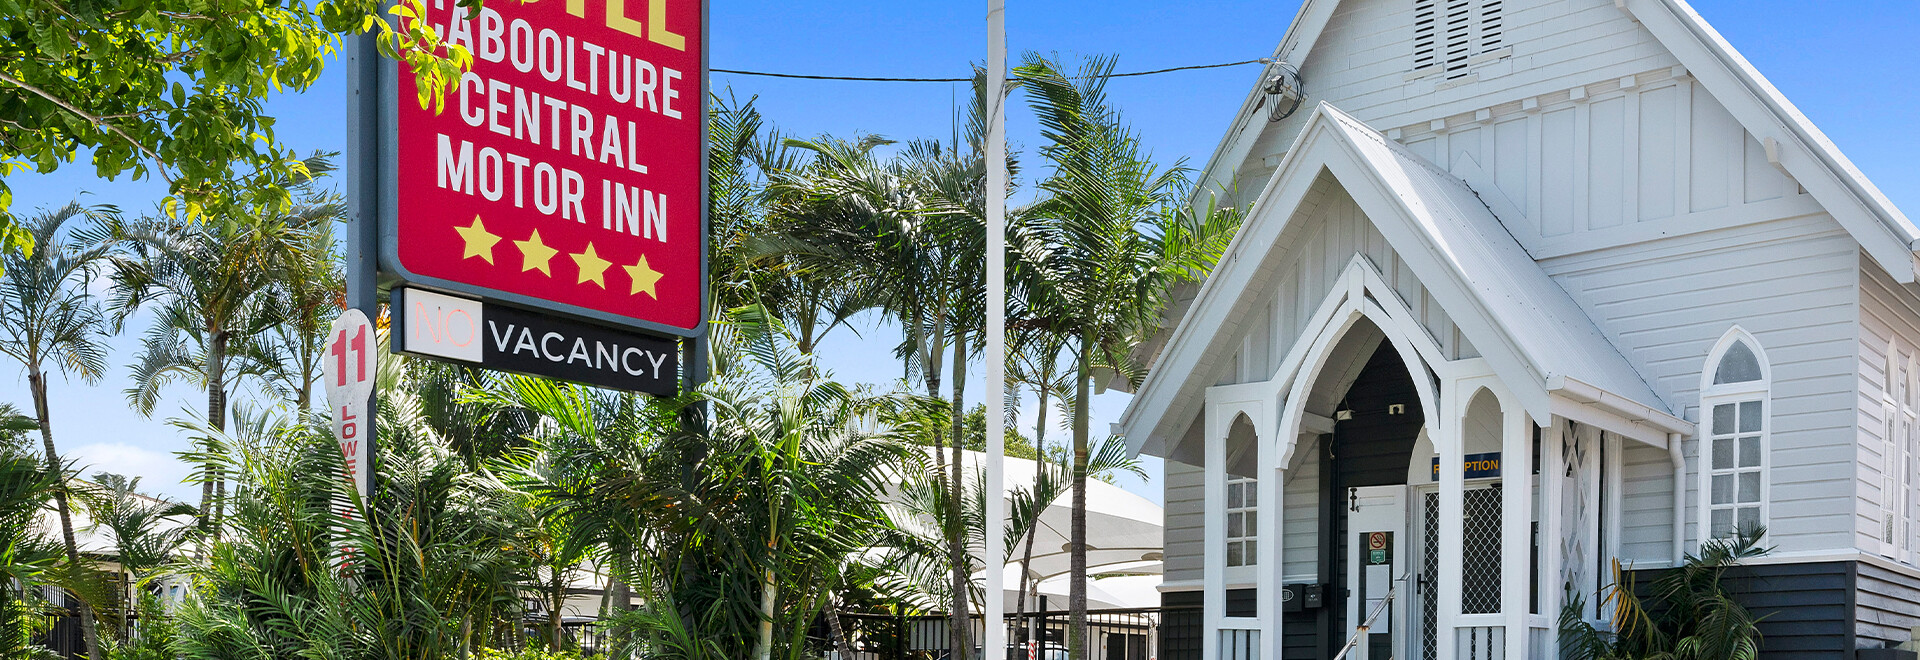 Motel Frontage - Caboolture Central Motor Inn